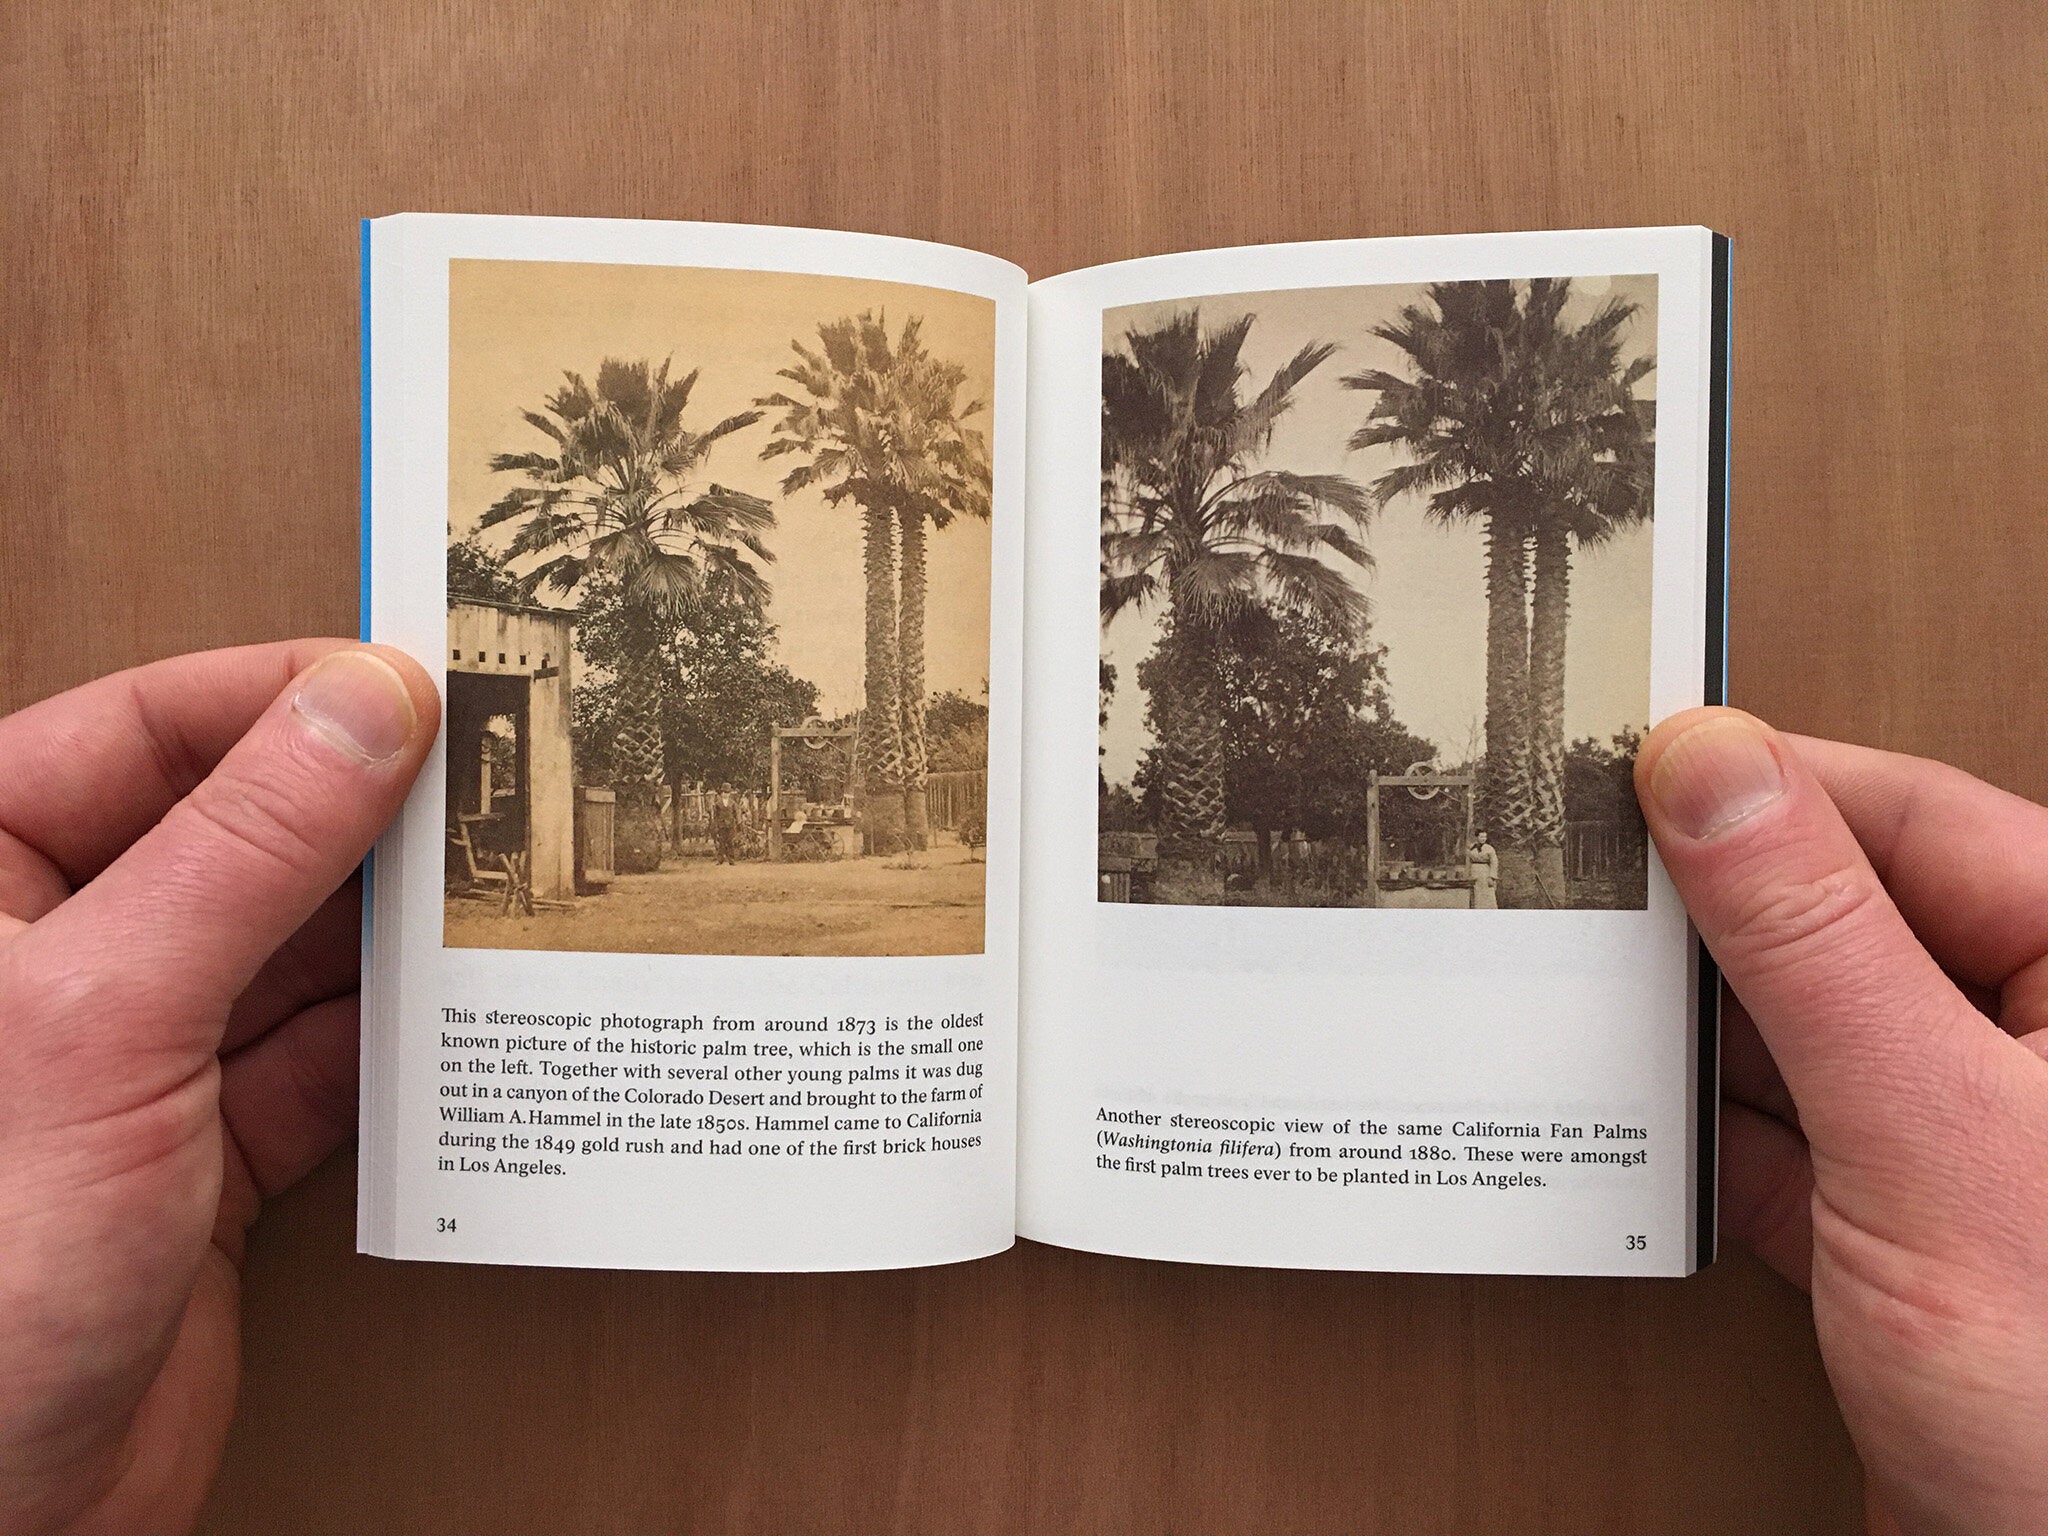 THE BOOK OF RECORD OF THE PALM CAPSULE: DESIGNED FOR RESISTING THE EFFECTS OF TIME by Christian Kosmas Mayer